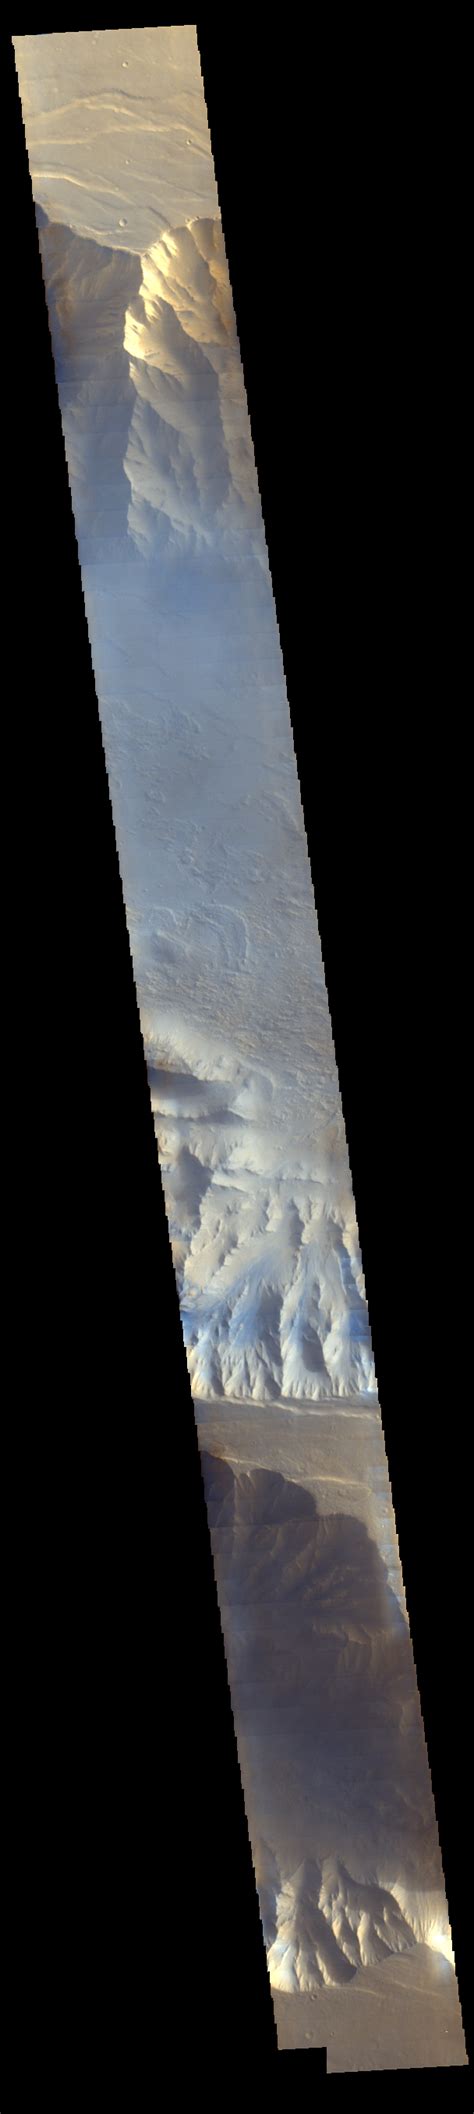 Mars Odyssey View Of Morning Clouds In Canyon Nasas Mars Exploration